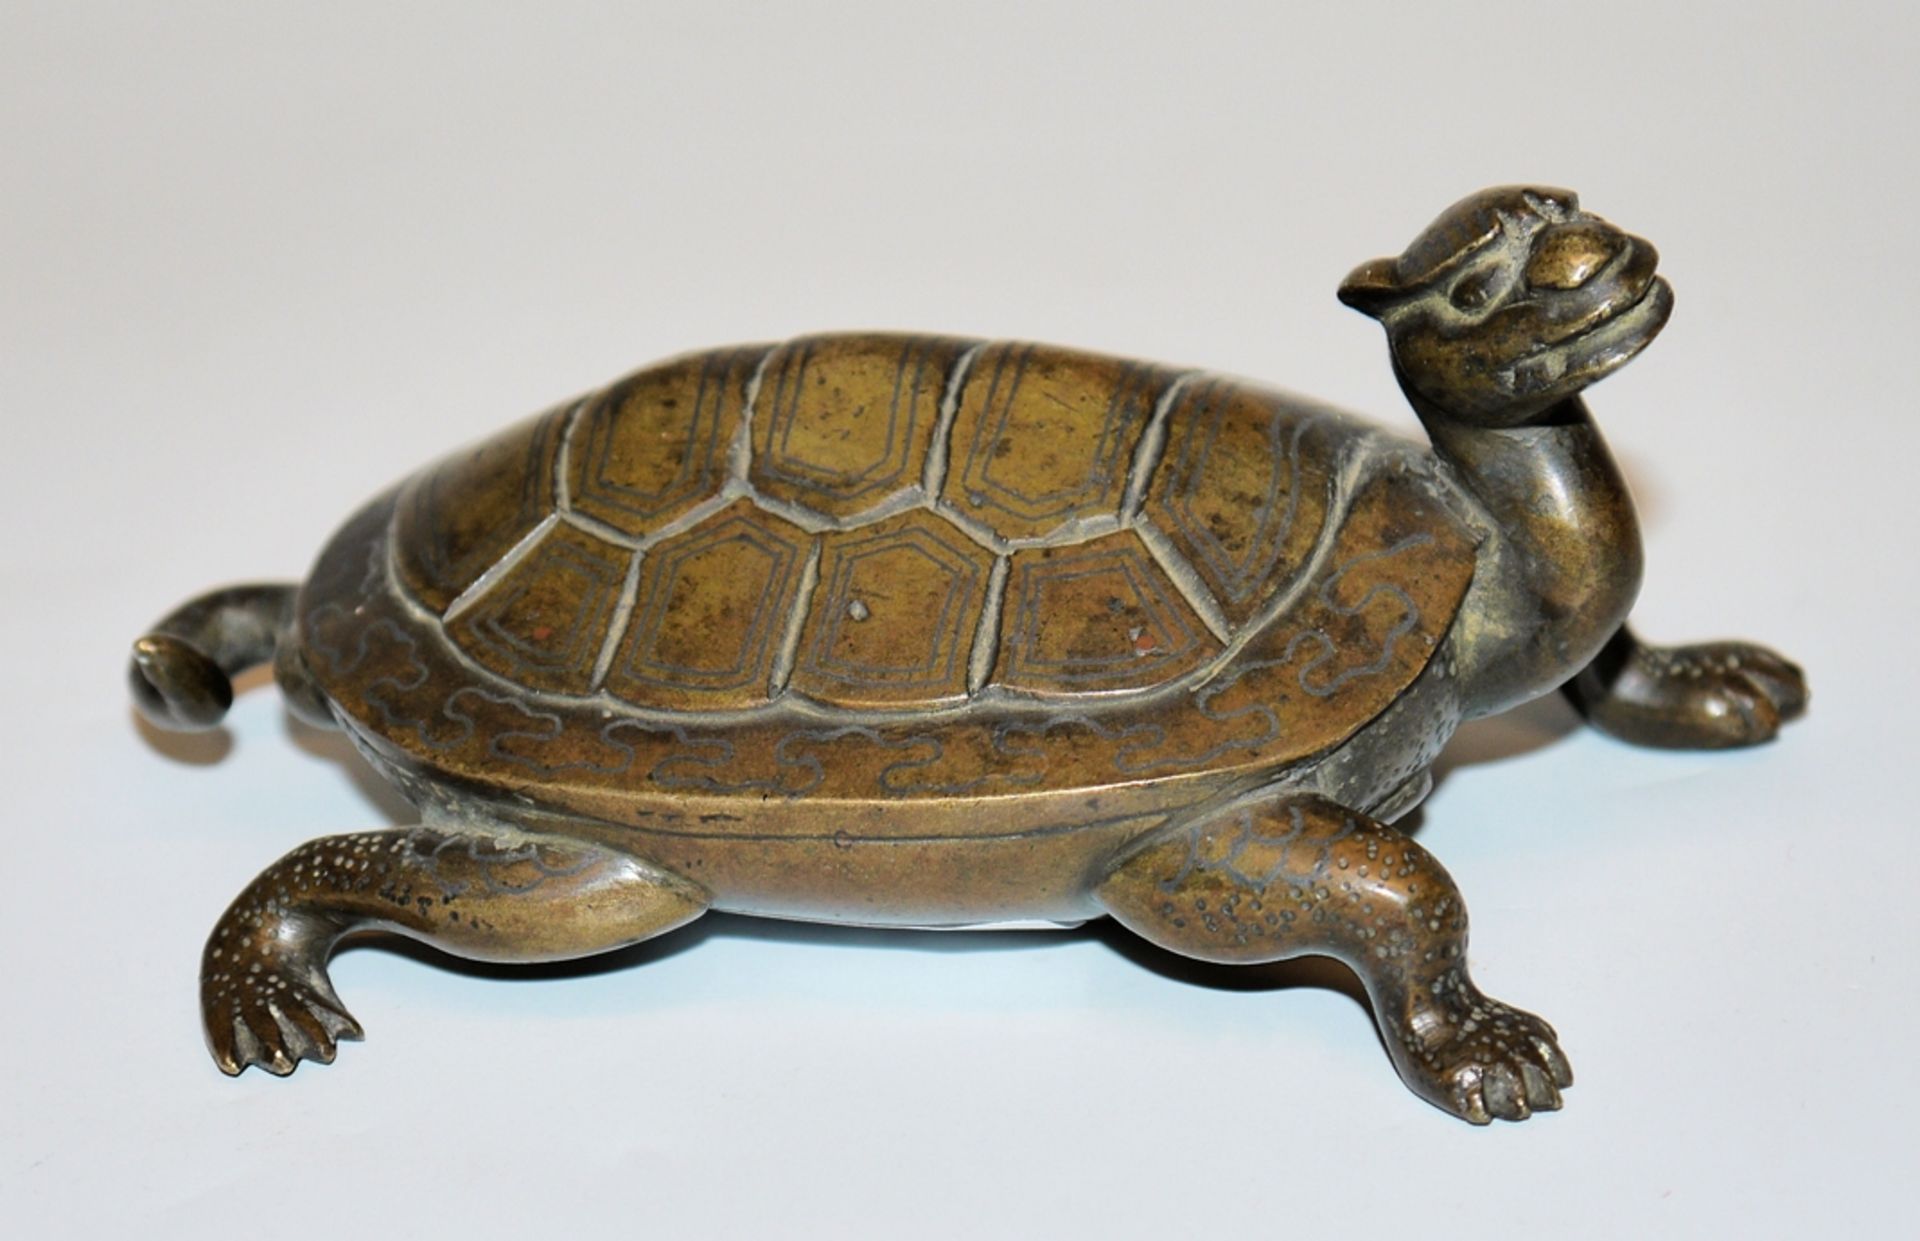 The dragon turtle Long Gui, Chinese small bronze from the Qing period around 1900